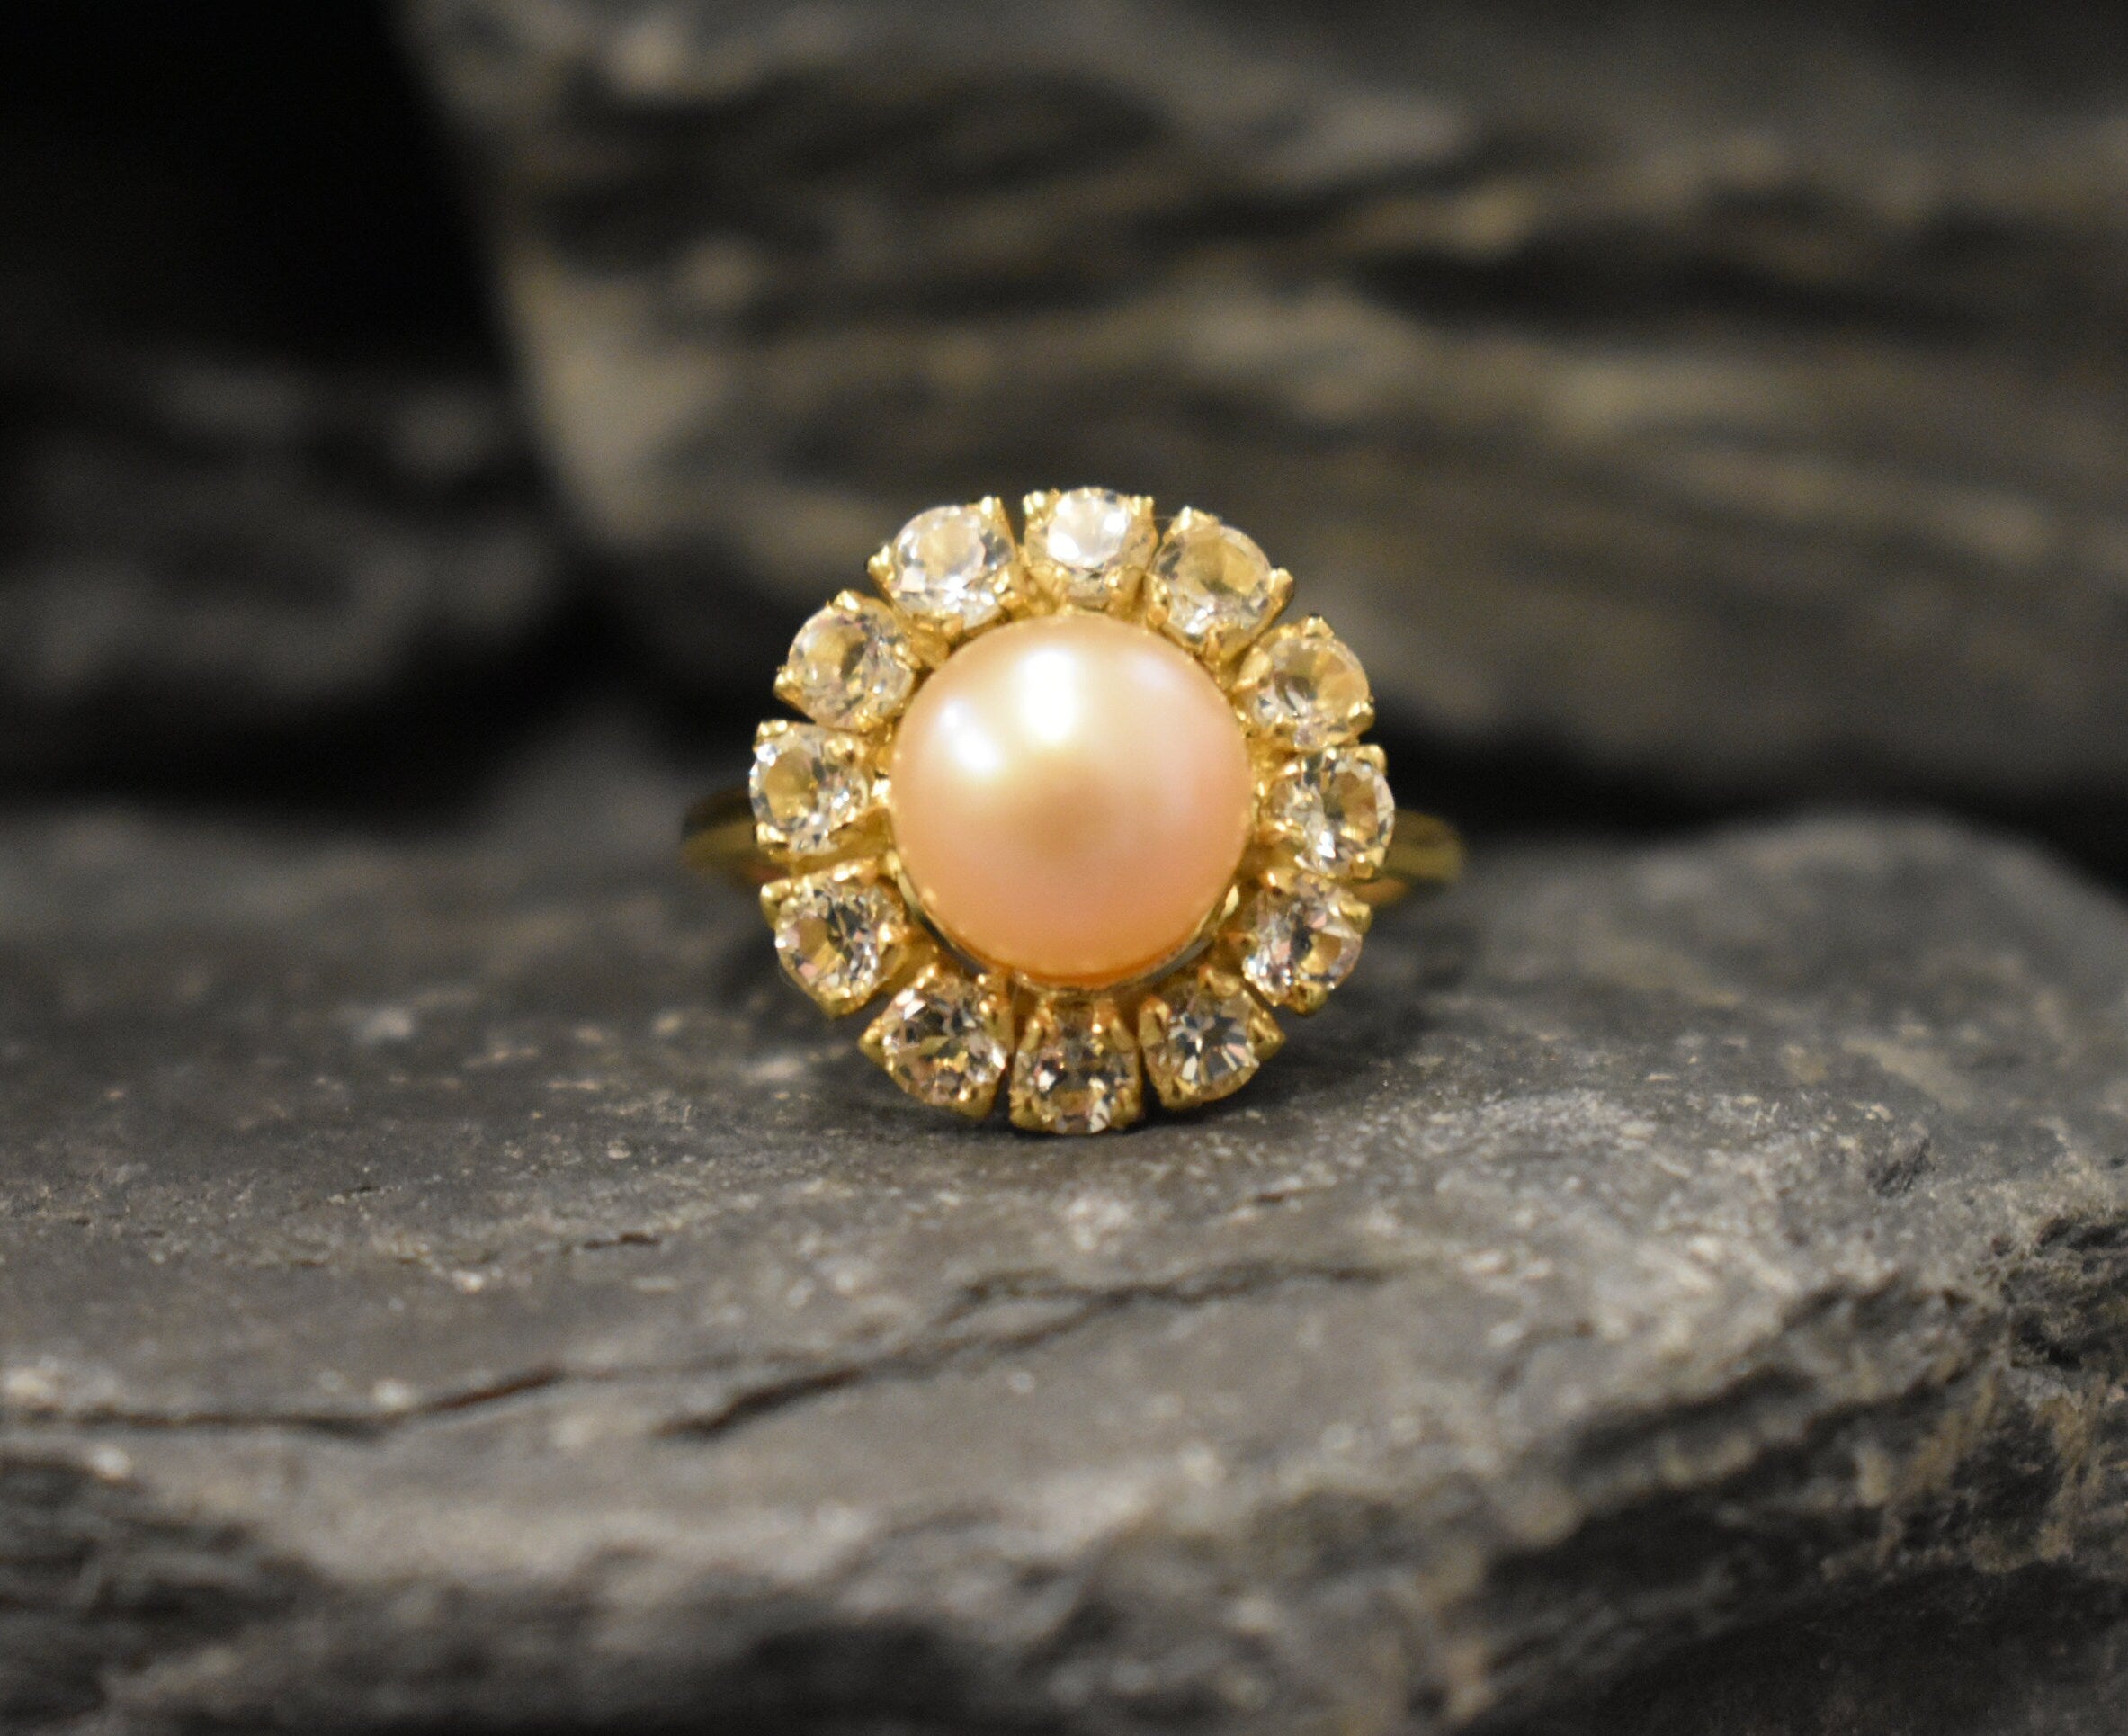 Beige Pearl Ring, Pearl Ring, Natural Beige Pearl, June Birthstone, Gold Victorian Ring, Gold Pearl Ring, Vintage Ring, Solid Silver Ring